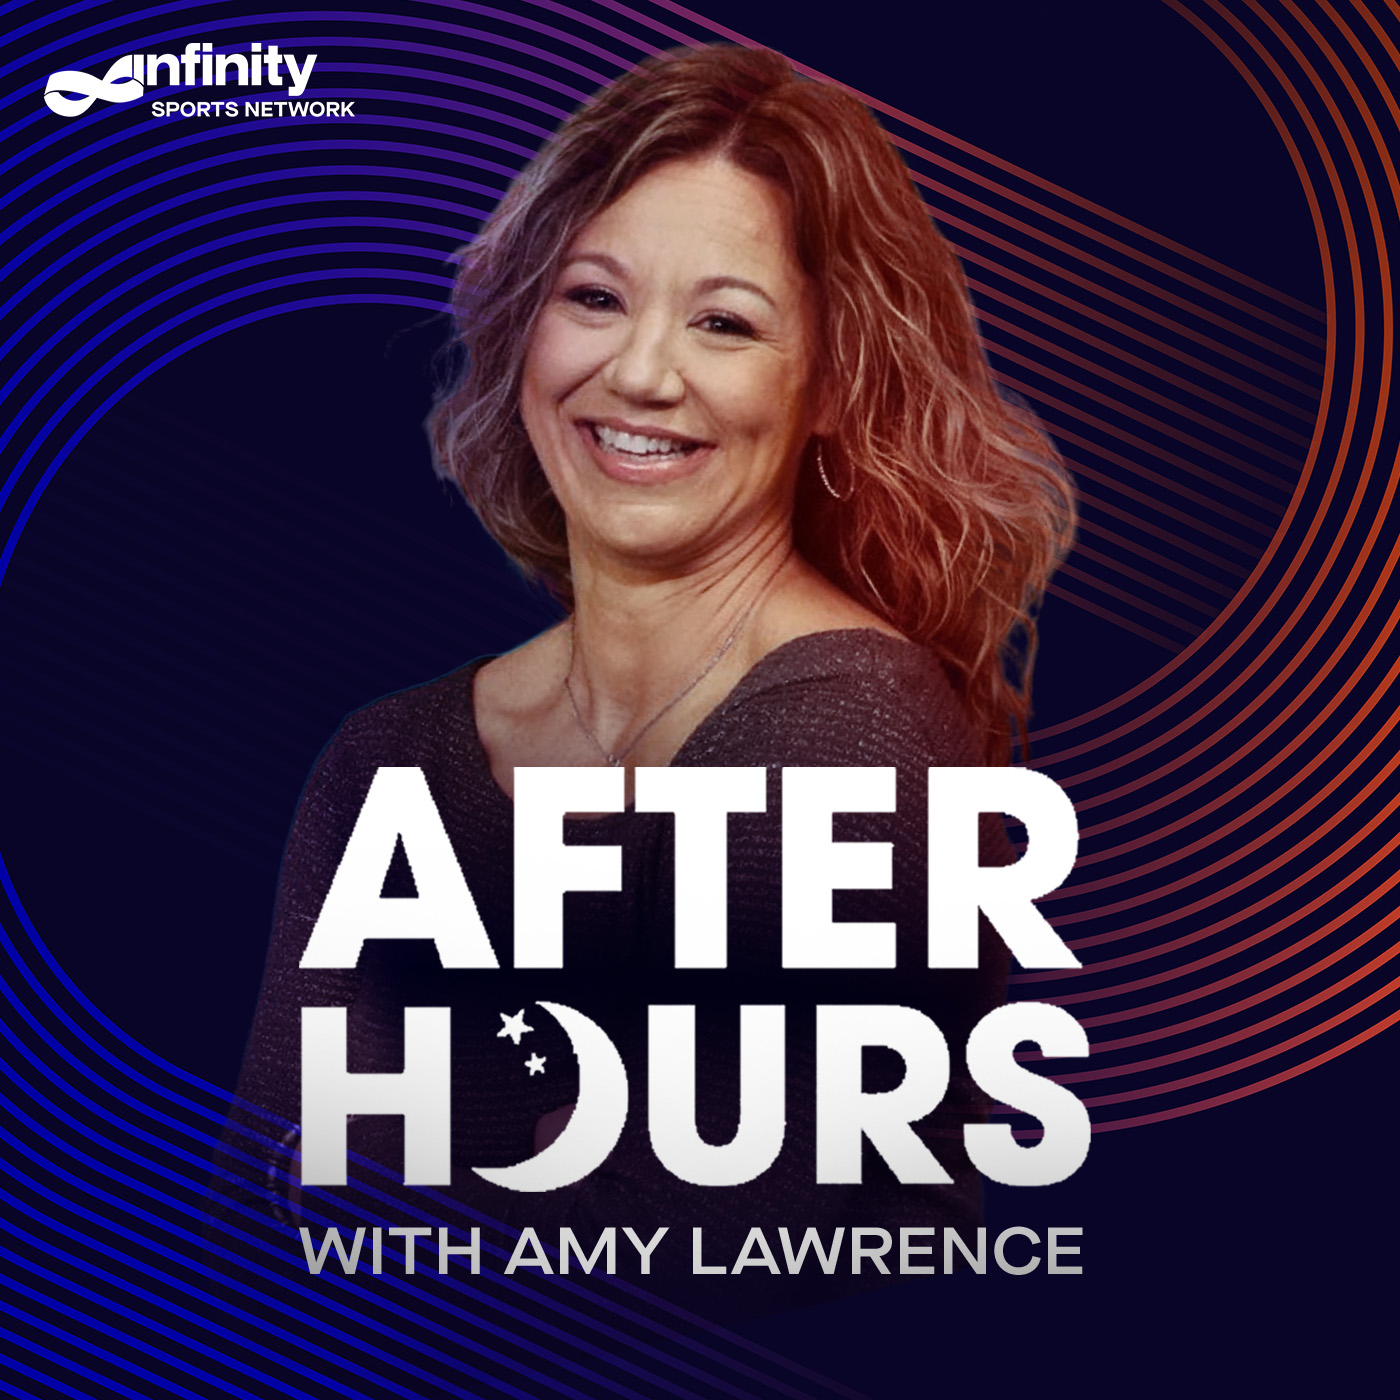 4/1/21 After Hours with Amy Lawrence PODCAST: Hour 1